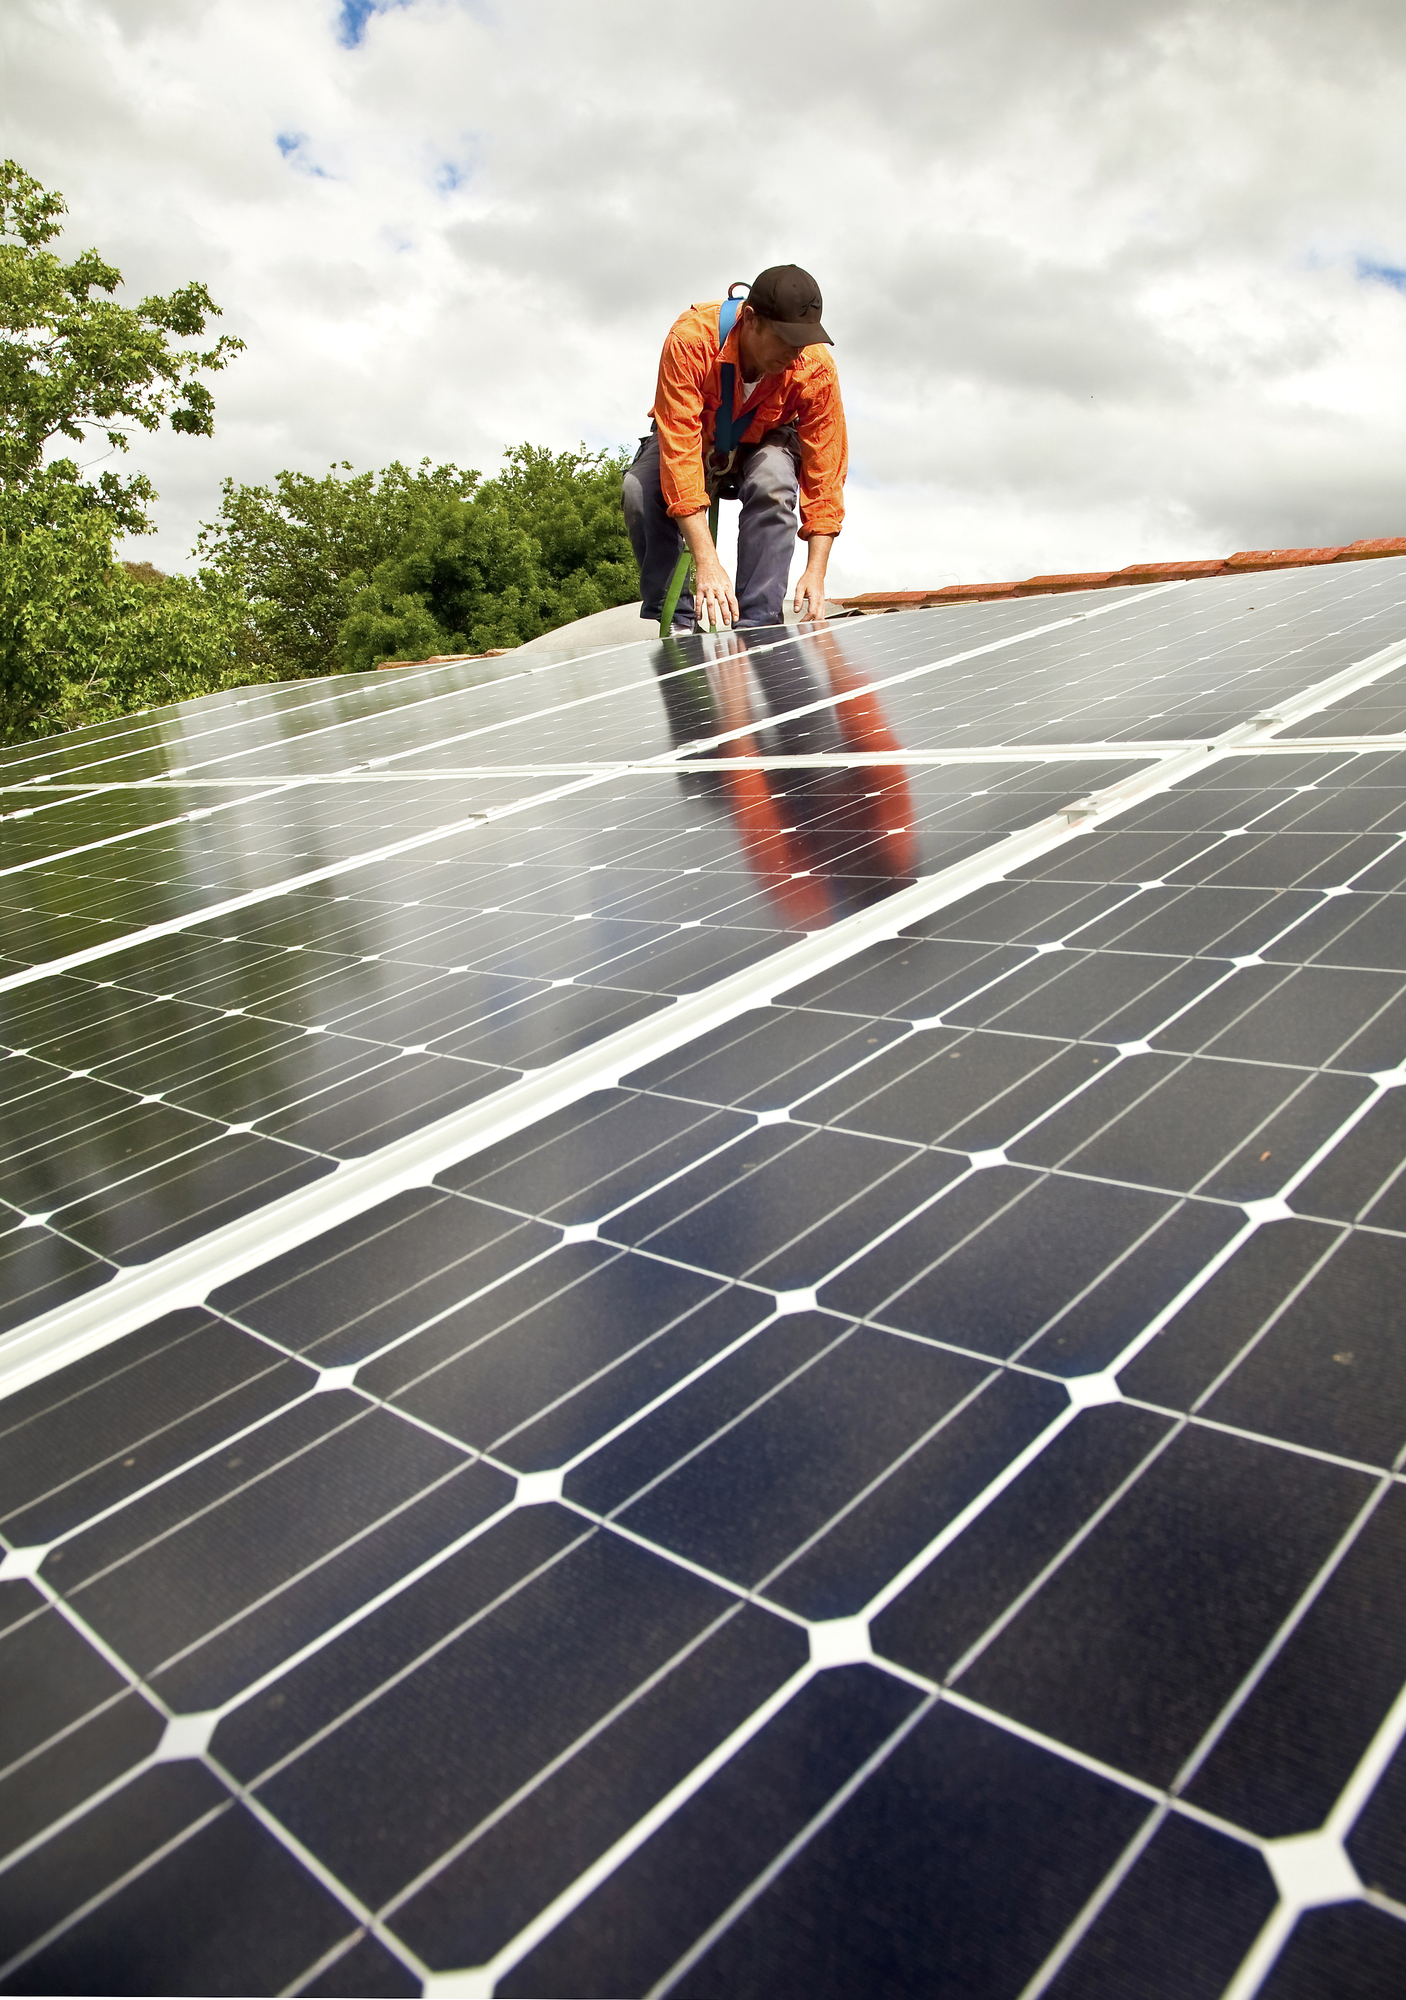 Electrician checking solar panels on roof to harness the energy of the sun